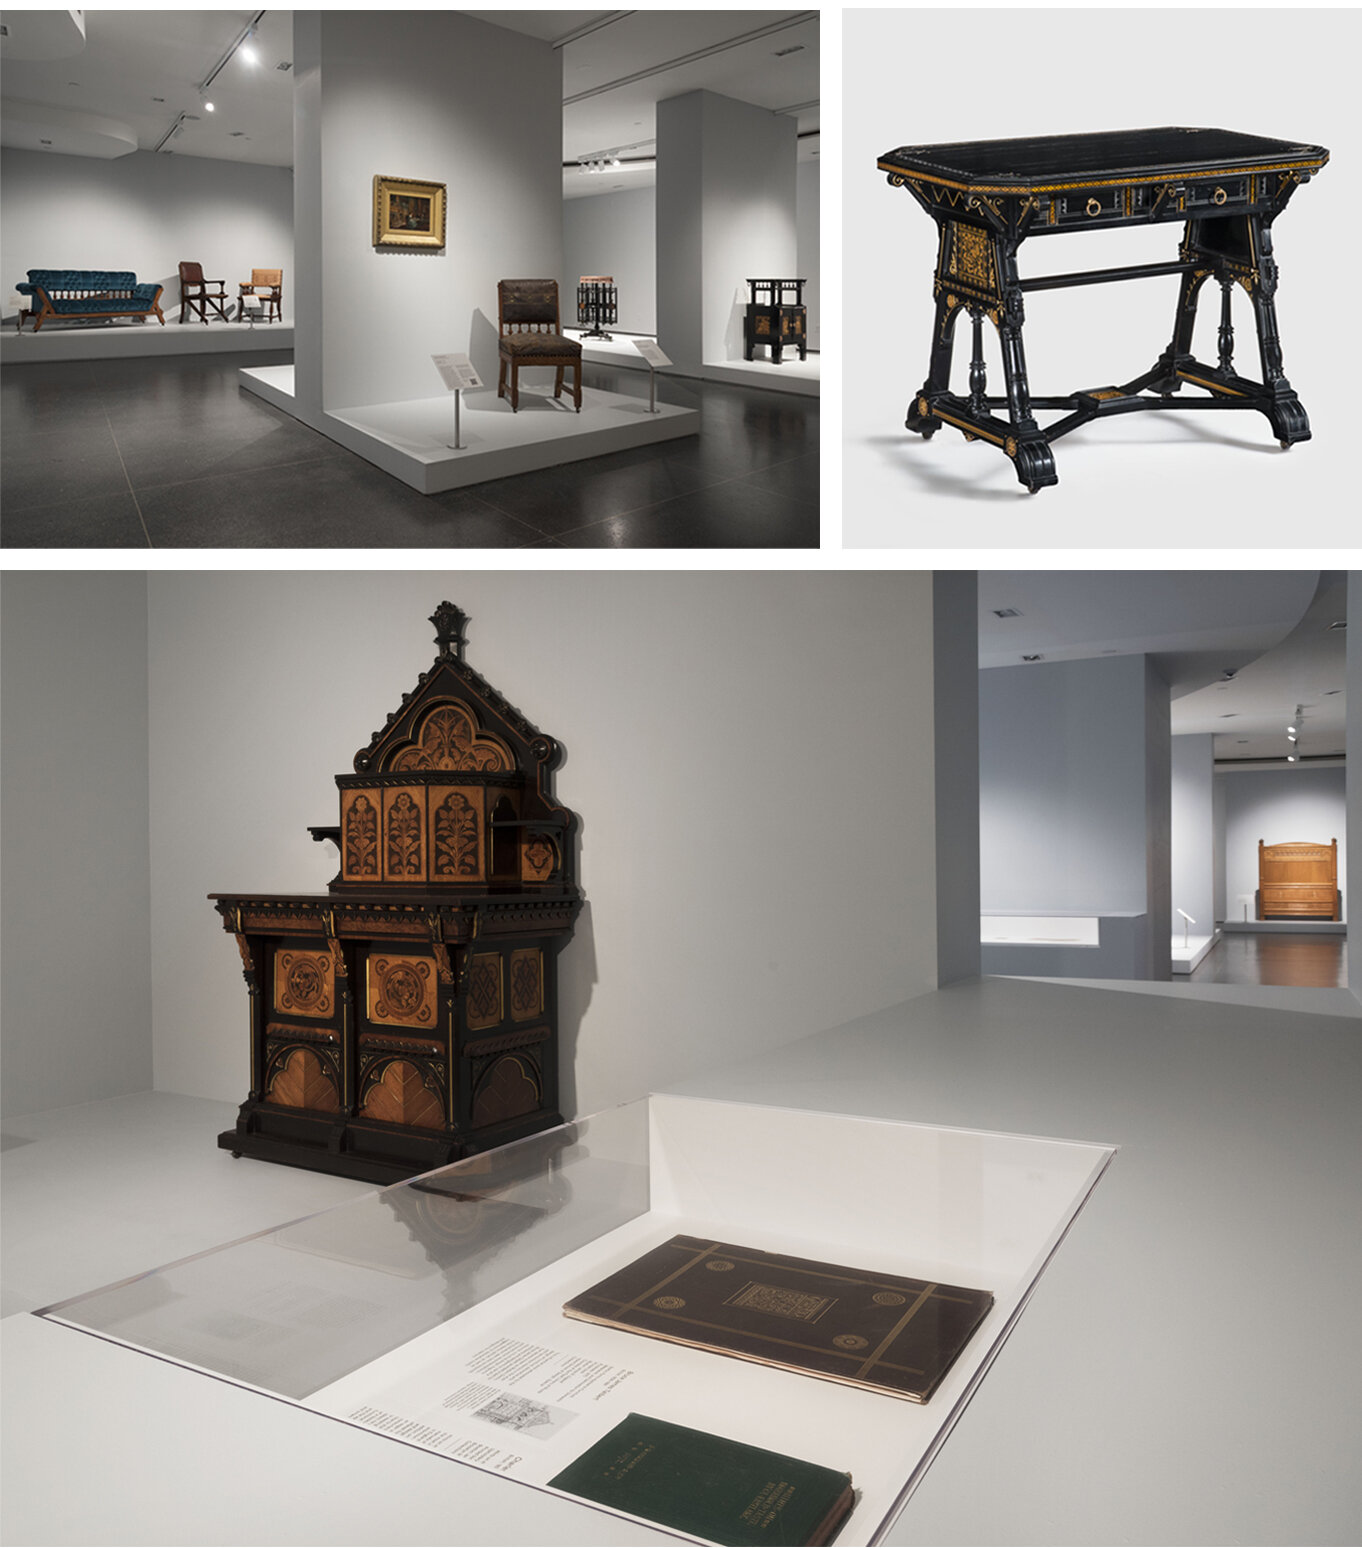 Three images from a museum showing various pieces of furniture from this era.